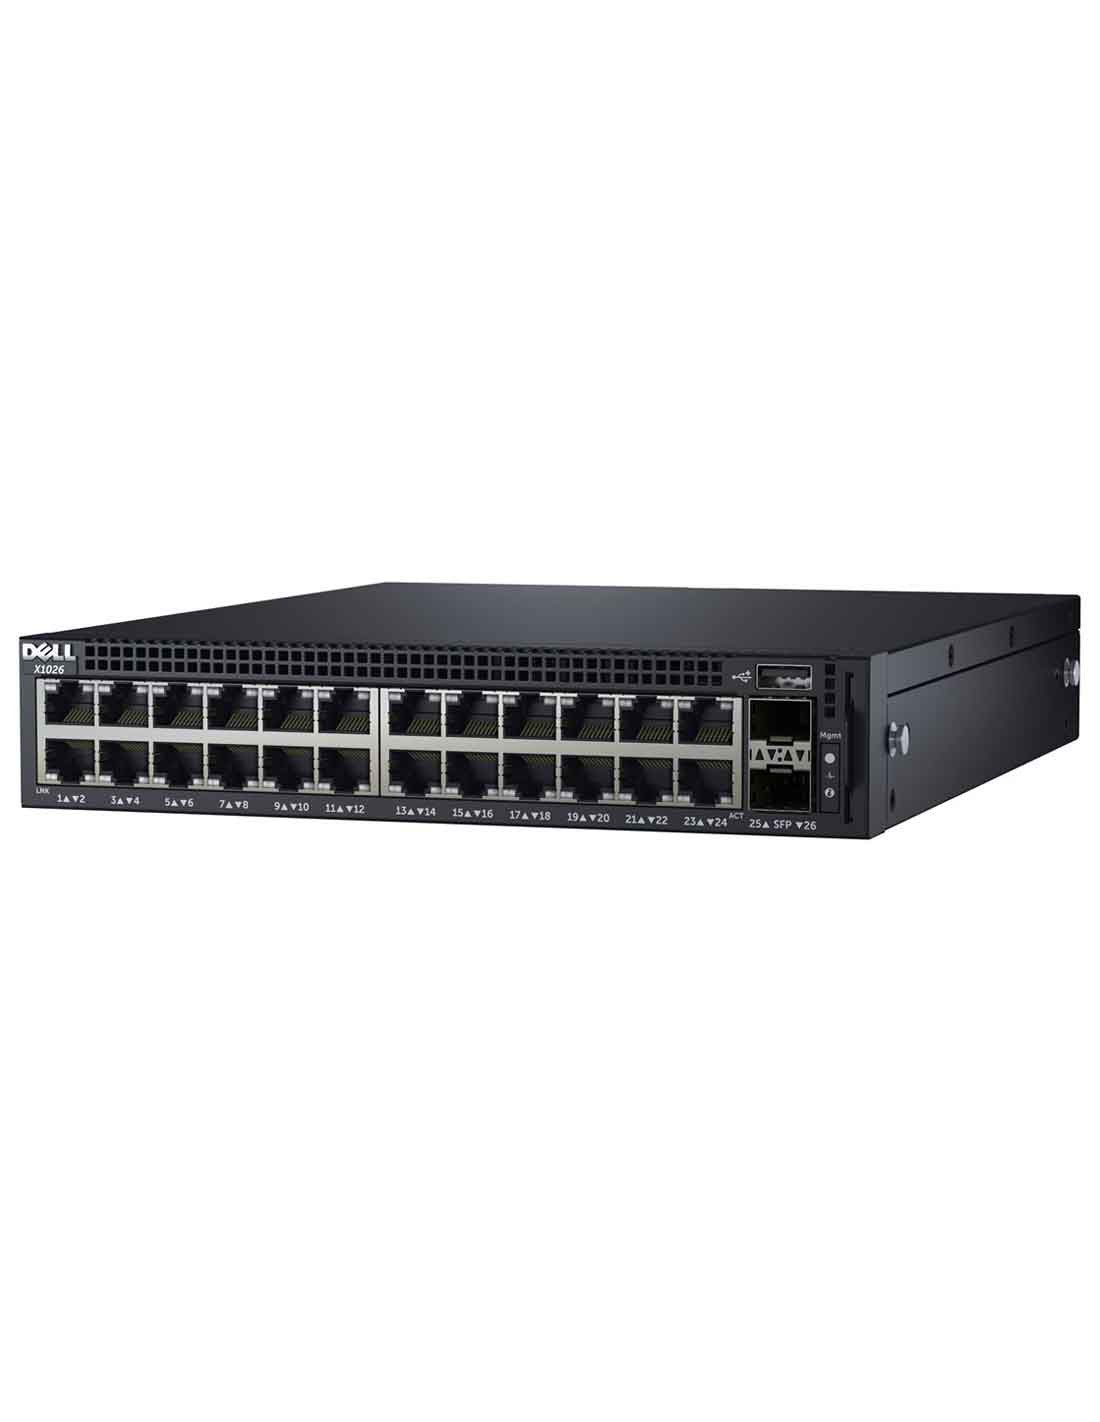 Dell Networking X1026 Managed Switch at a cheap price and fast free delivery in Dubai UAE